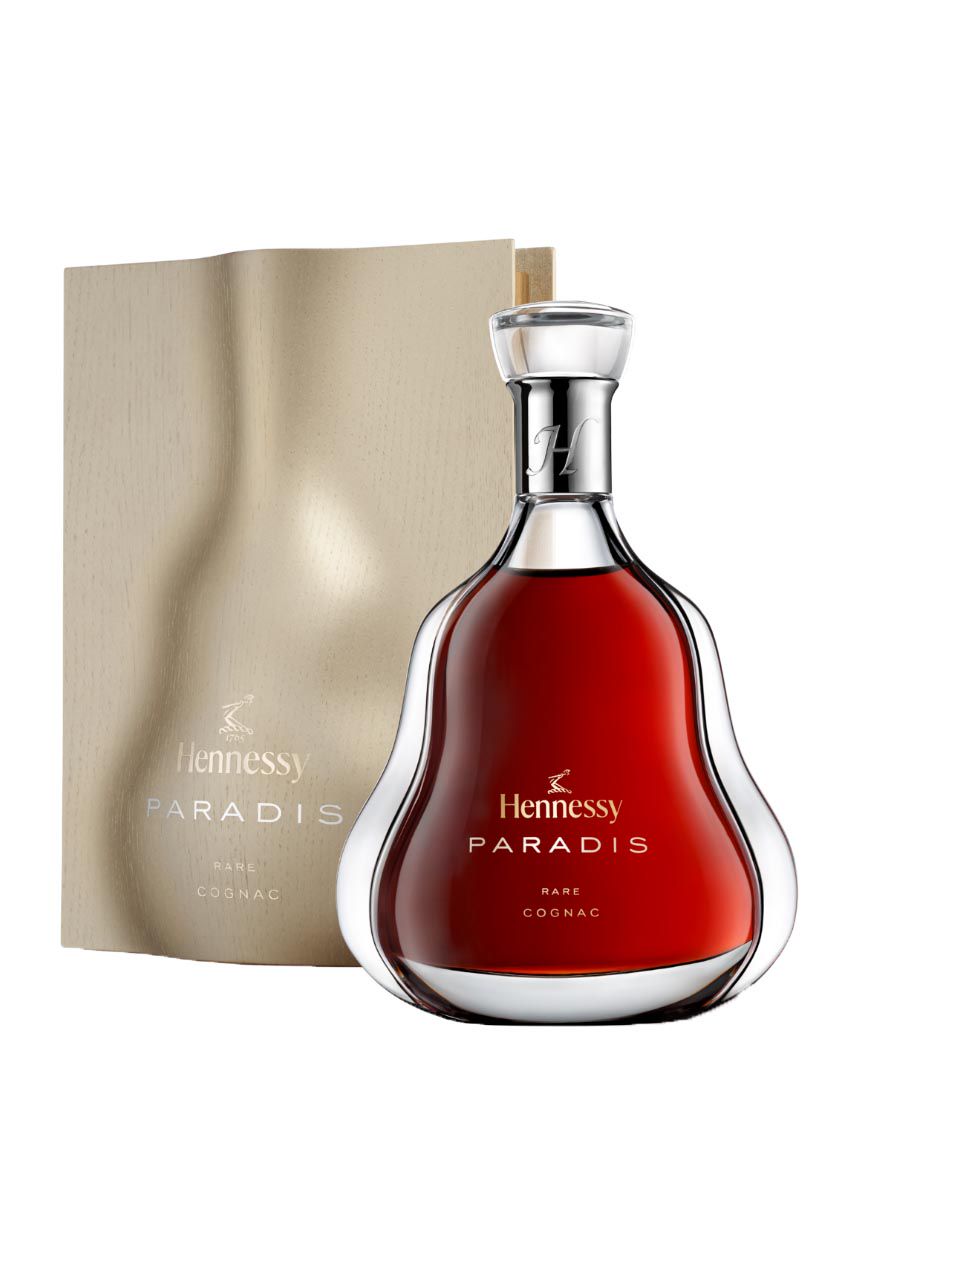 Hennessy Paradis 40% 0.7L gift pack | Frankfurt Airport Online 